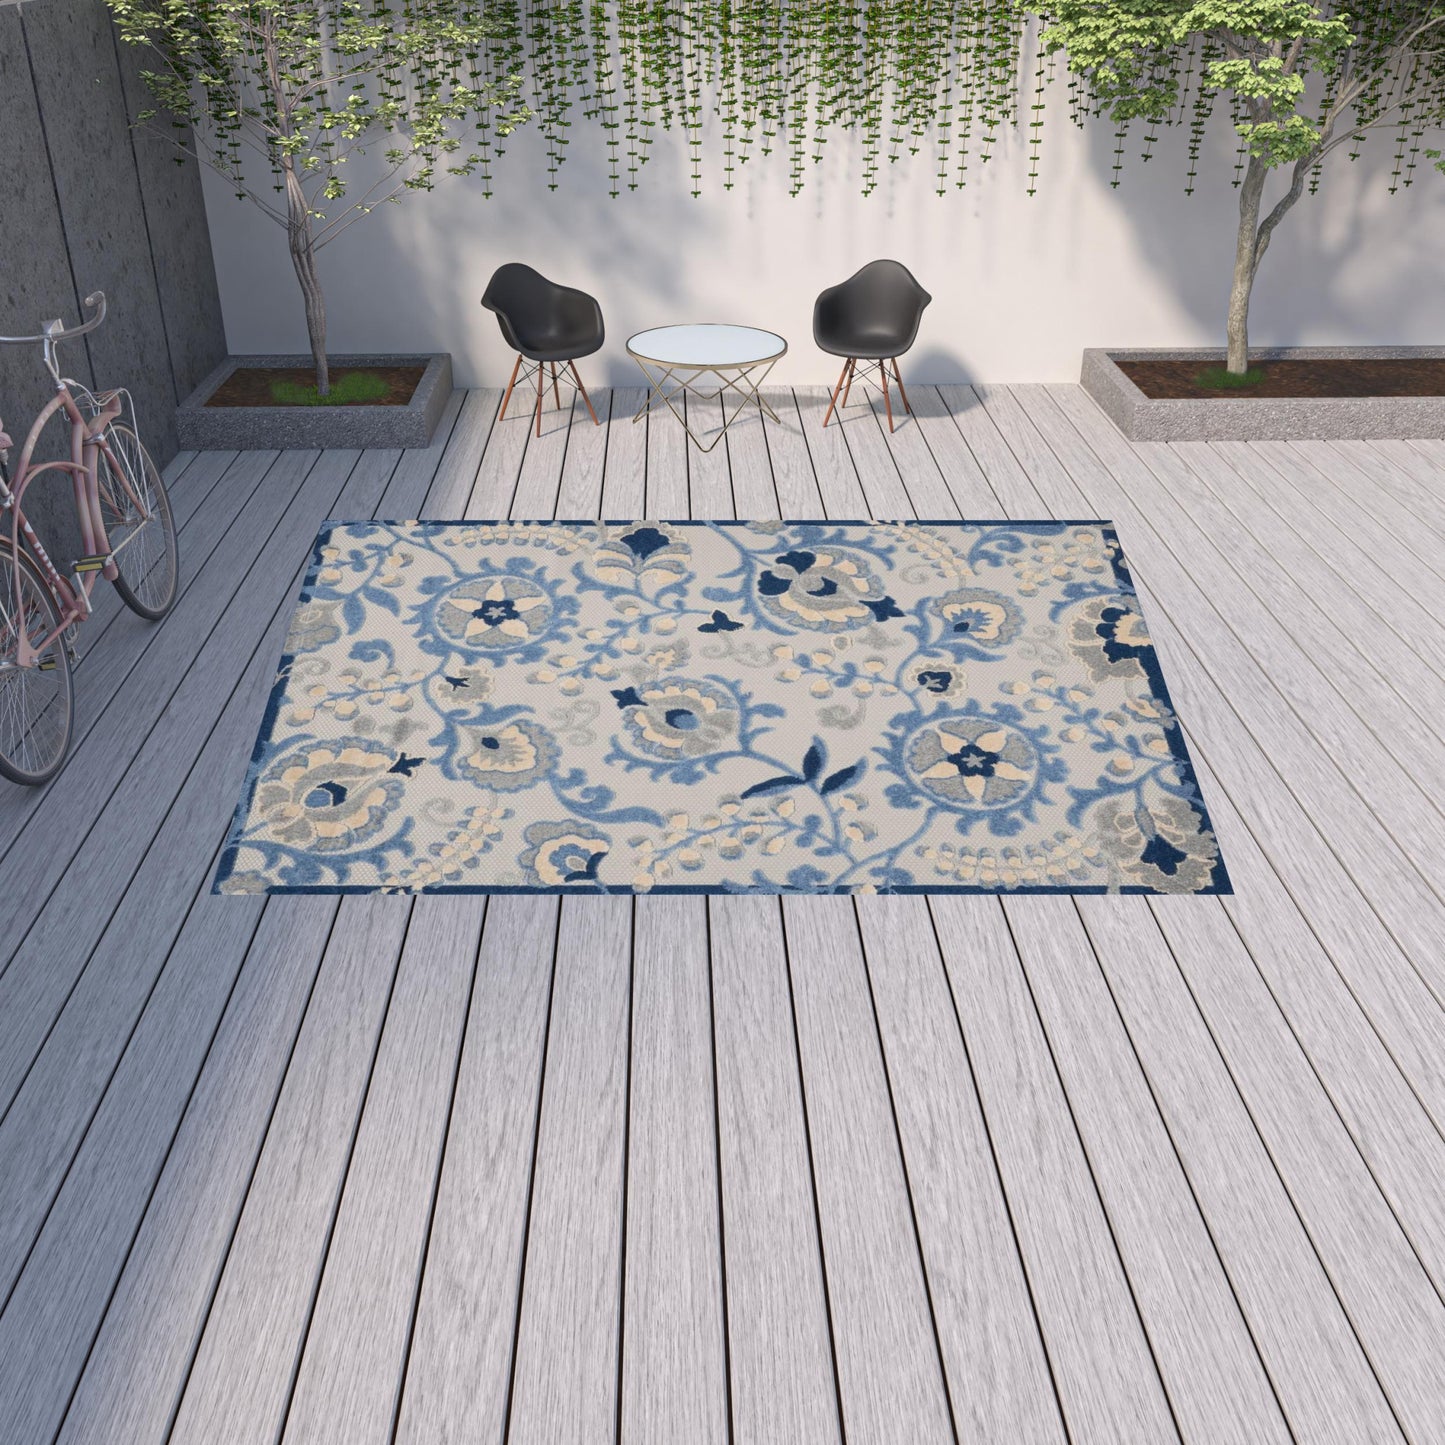 10' X 13' Blue And Grey Toile Non Skid Indoor Outdoor Area Rug